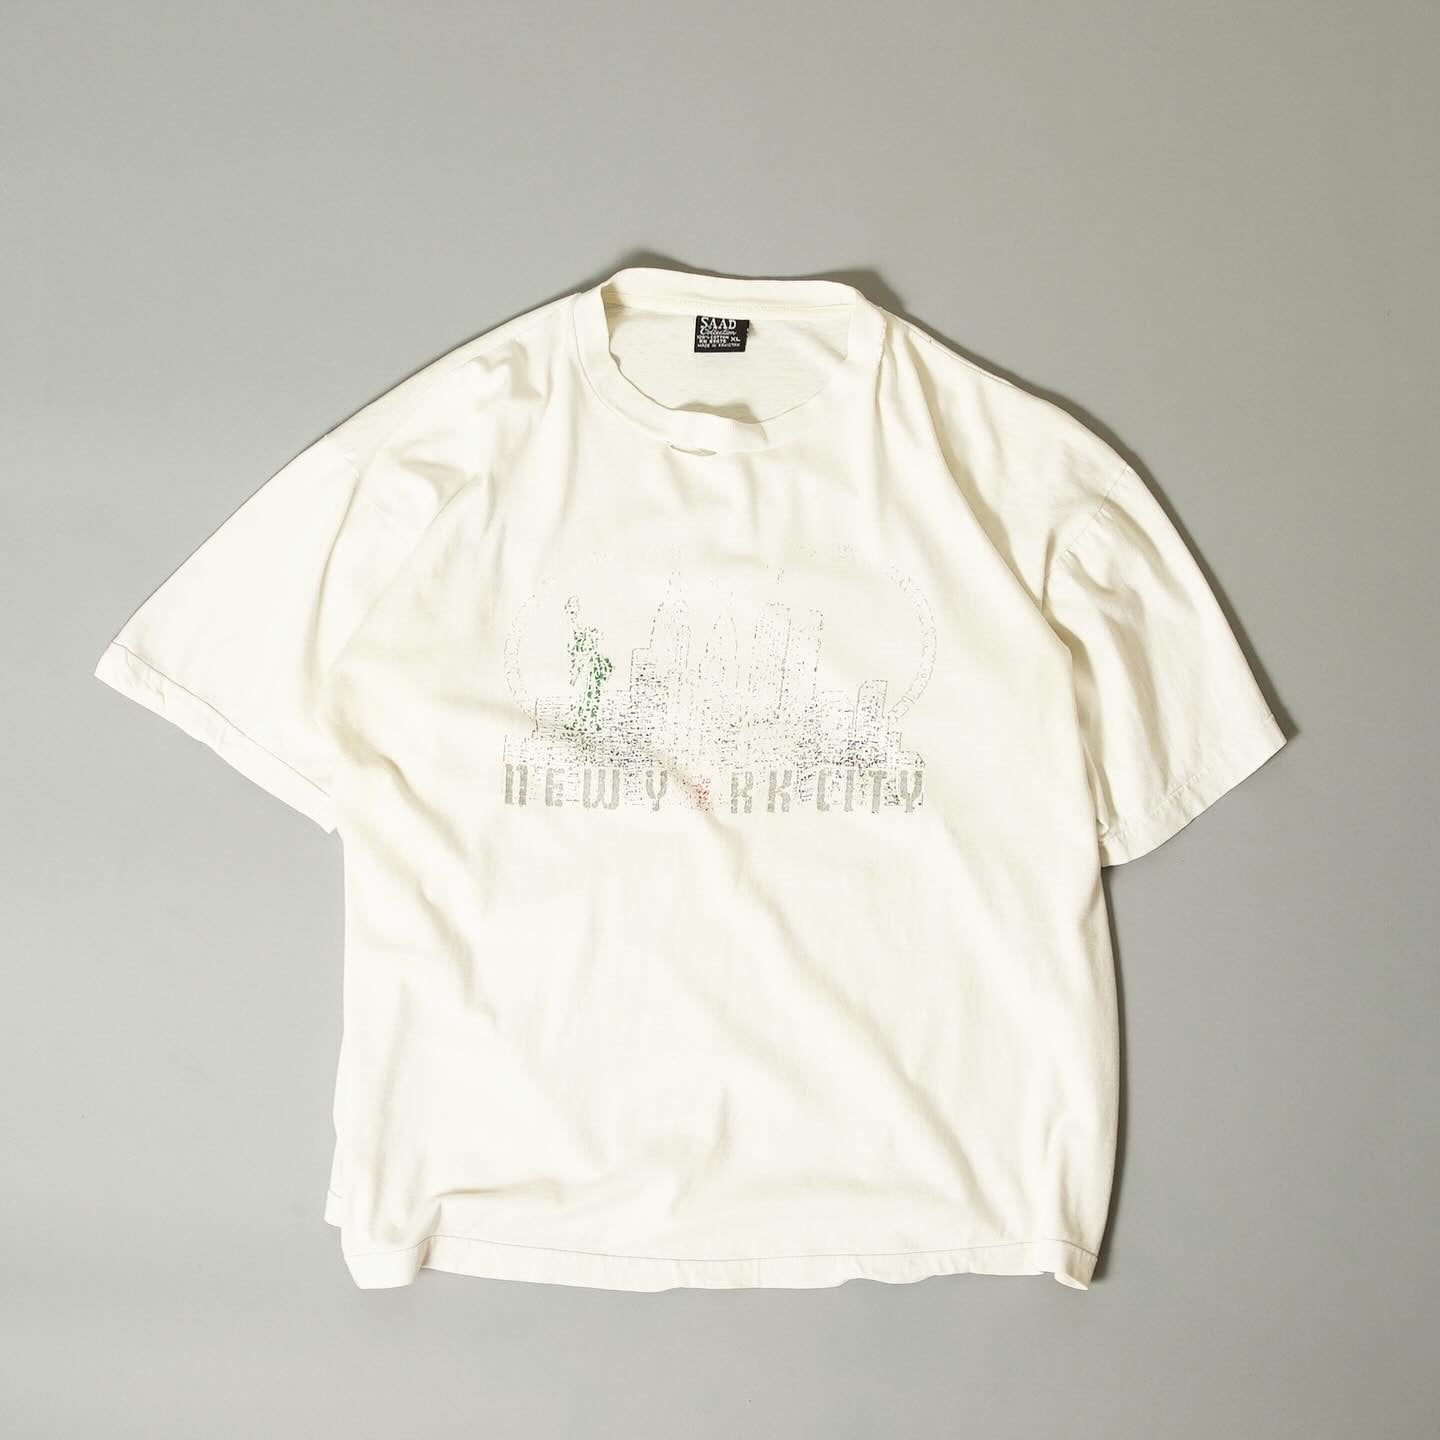 Worn Out New York City S/S Tee